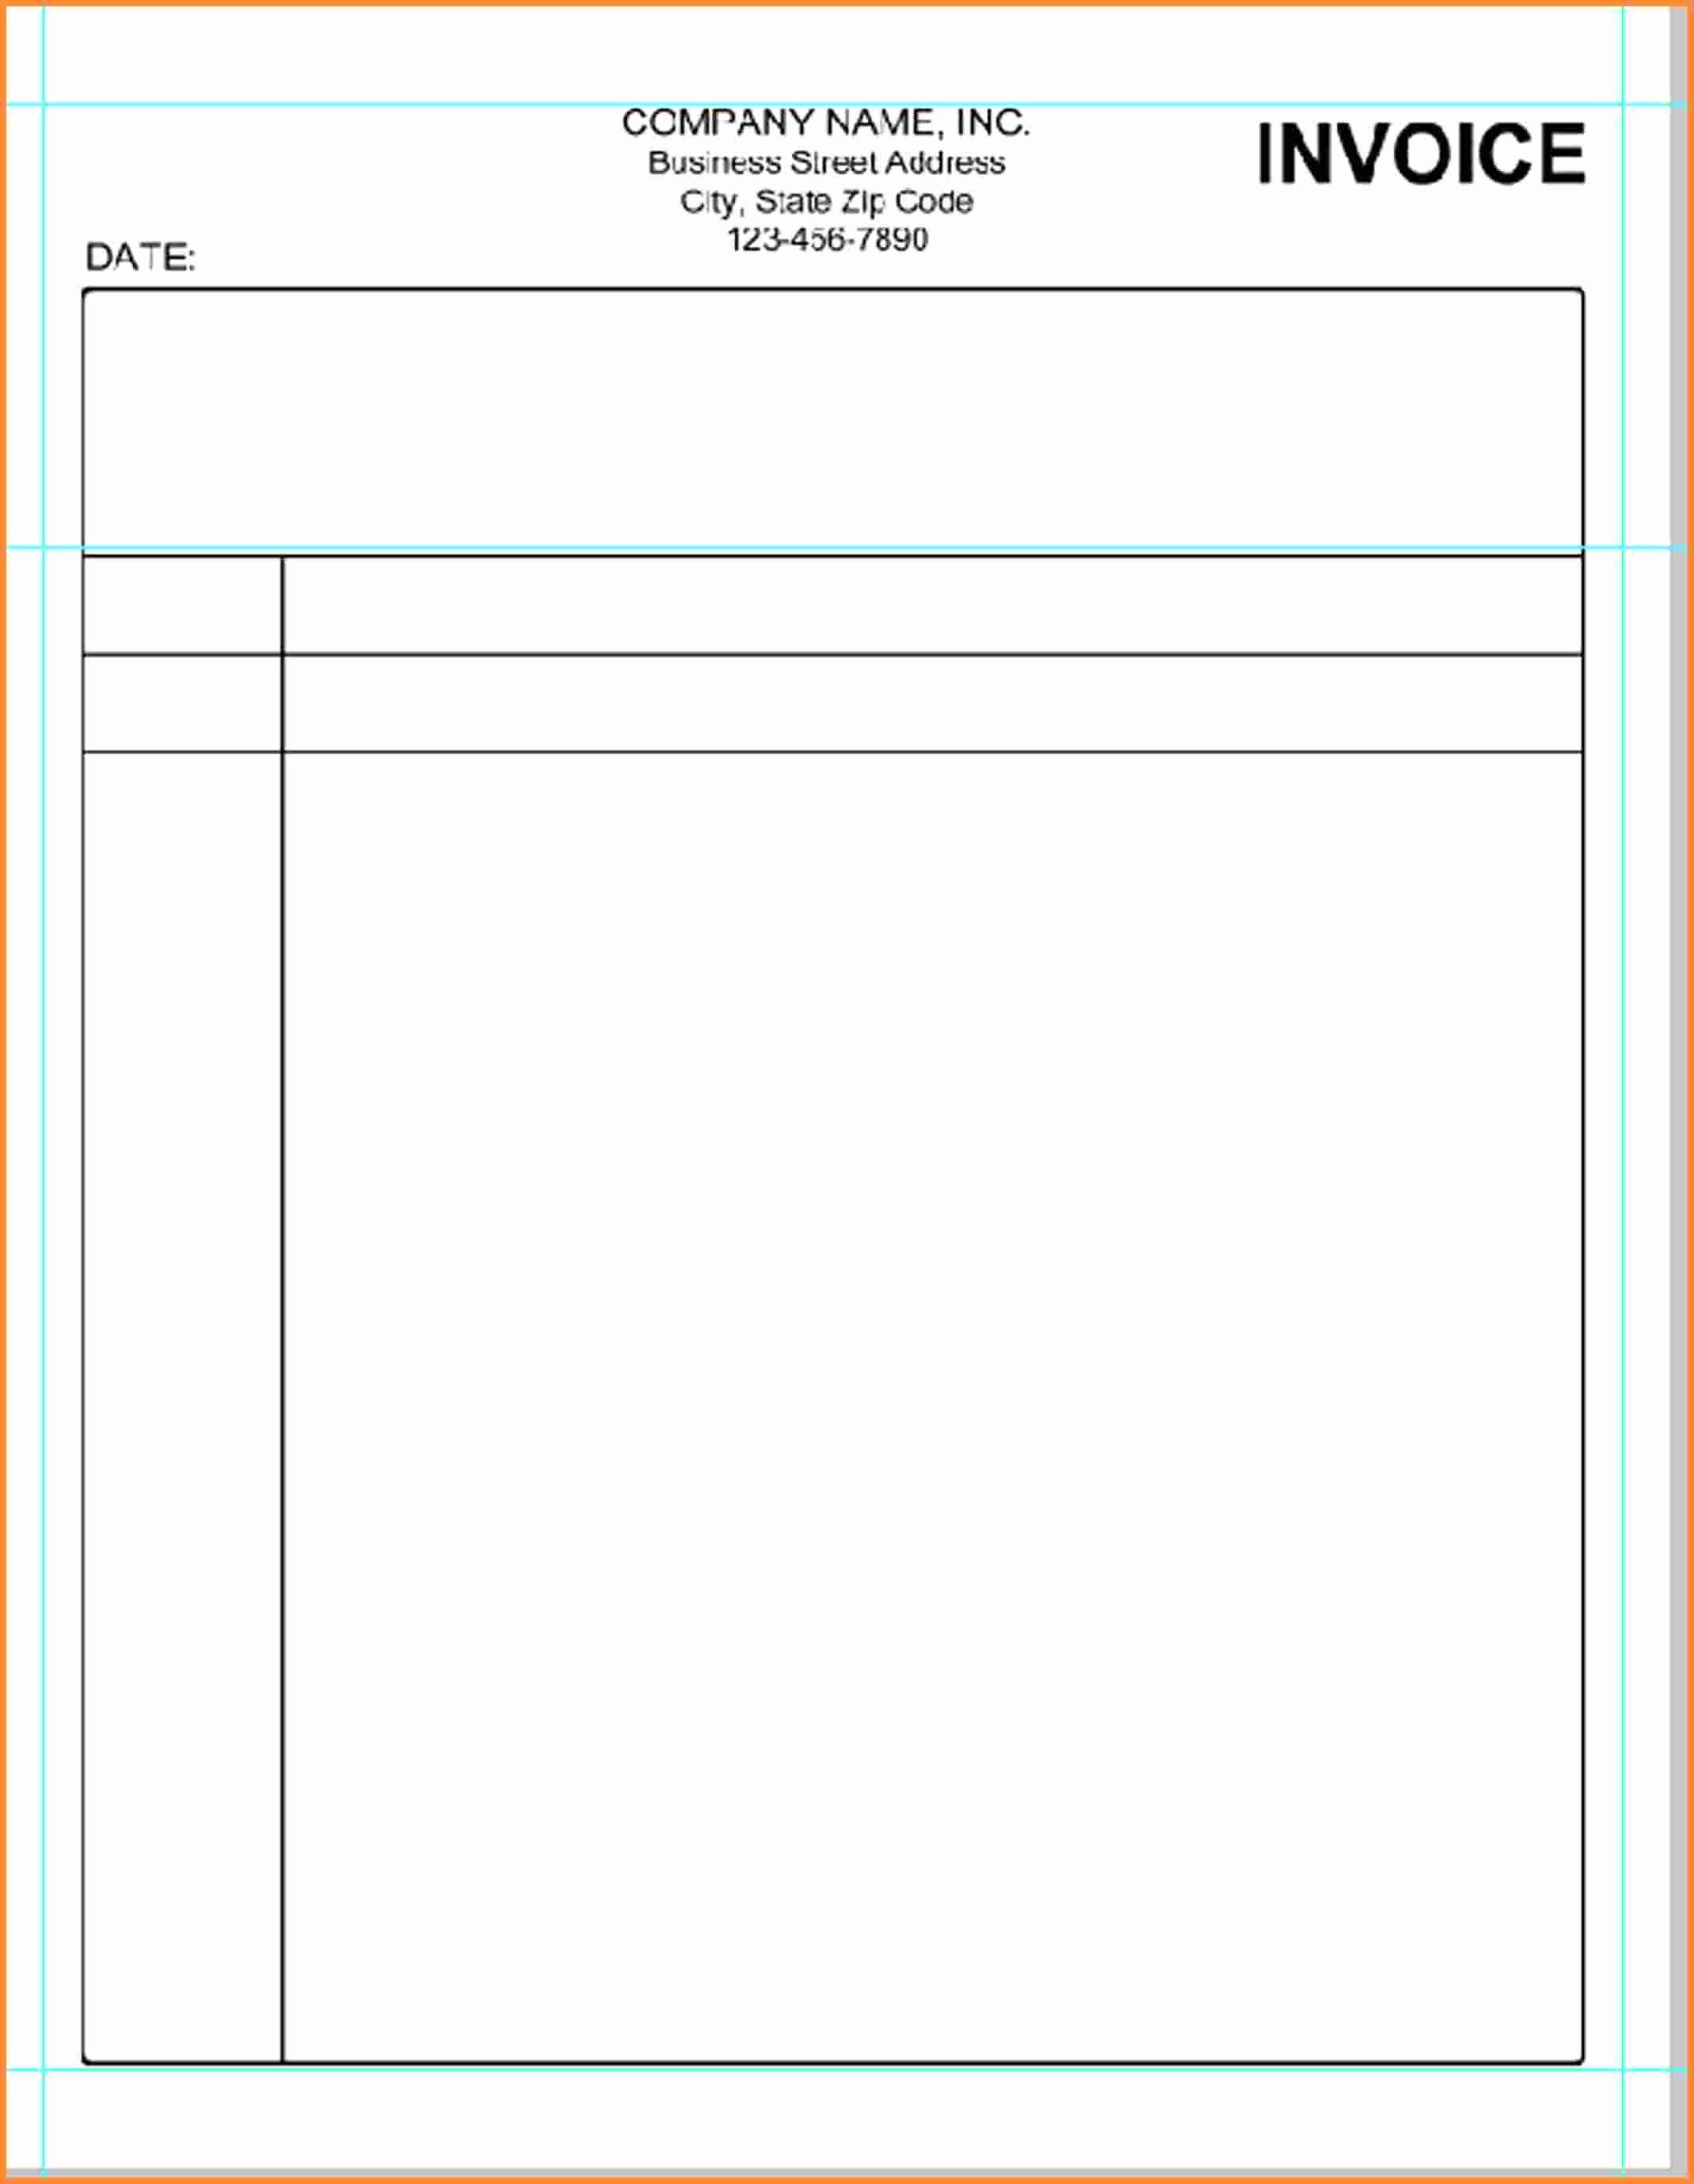 Free Printable Invoices Forms – Wfac.ca - Free Printable Invoice Forms